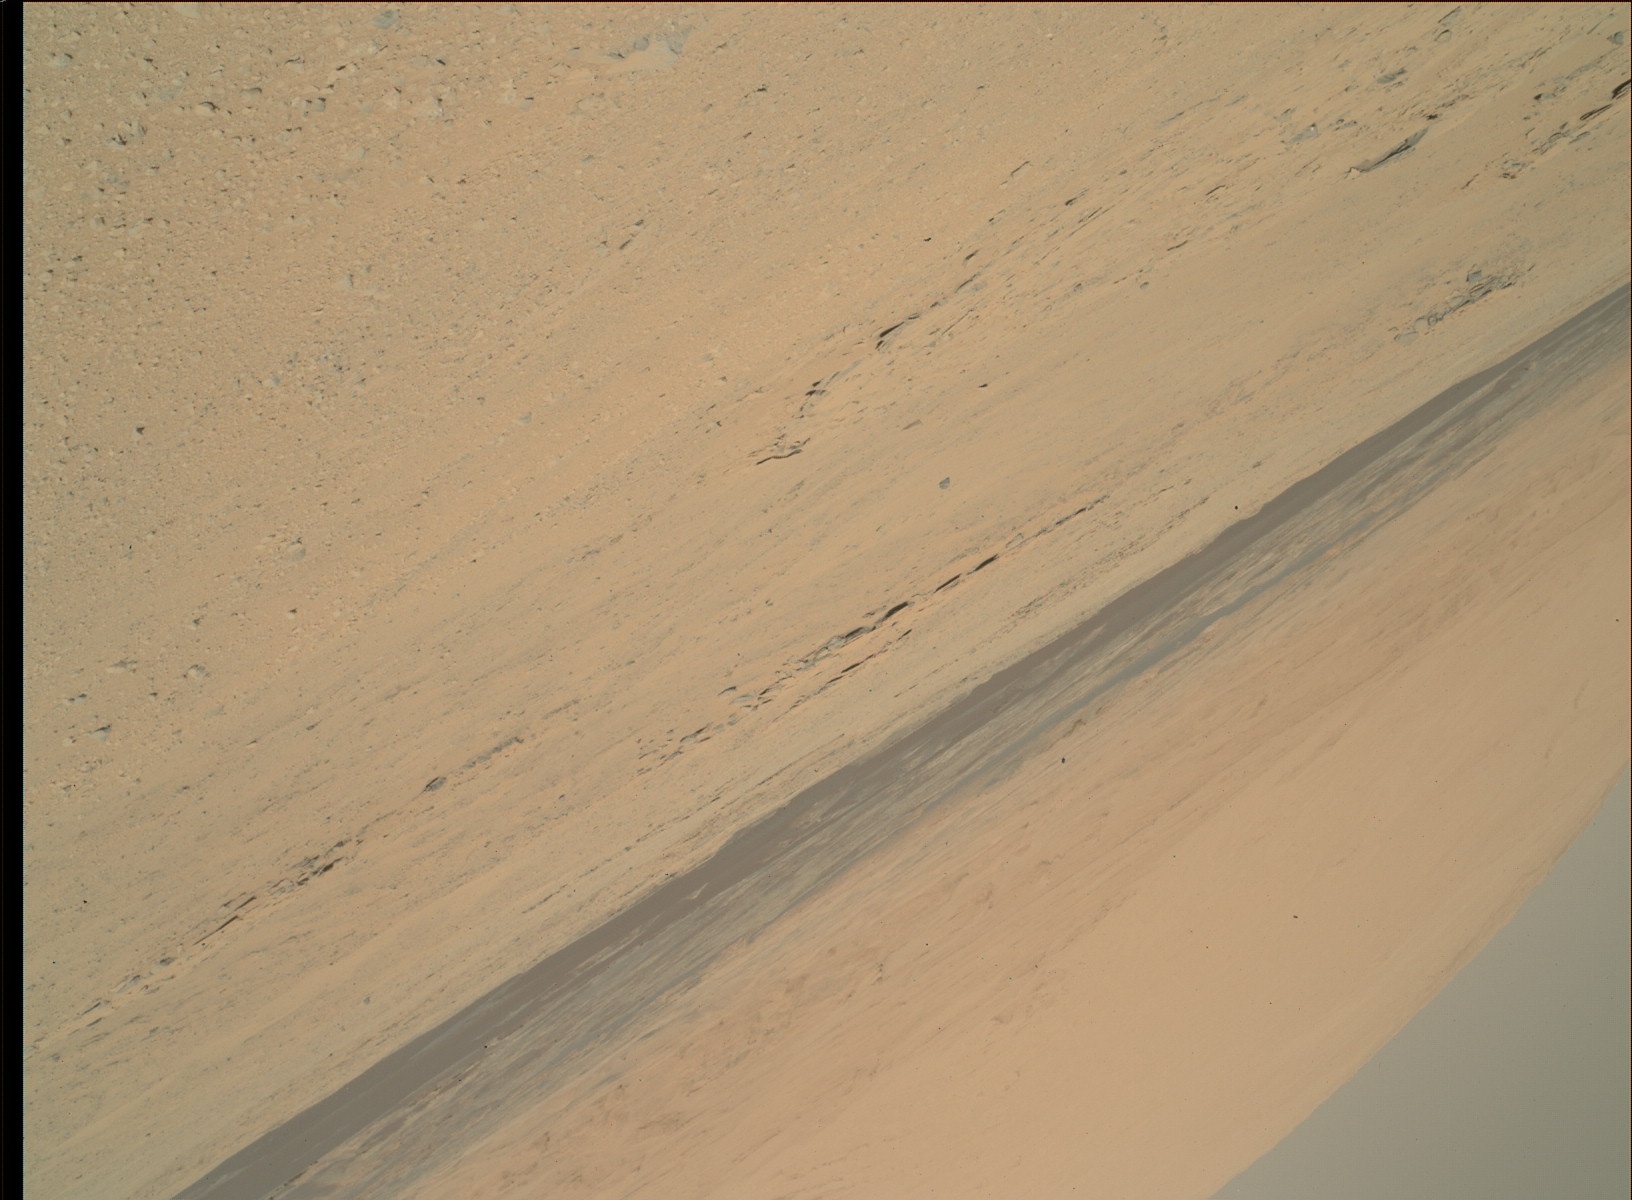 Nasa's Mars rover Curiosity acquired this image using its Mars Hand Lens Imager (MAHLI) on Sol 657